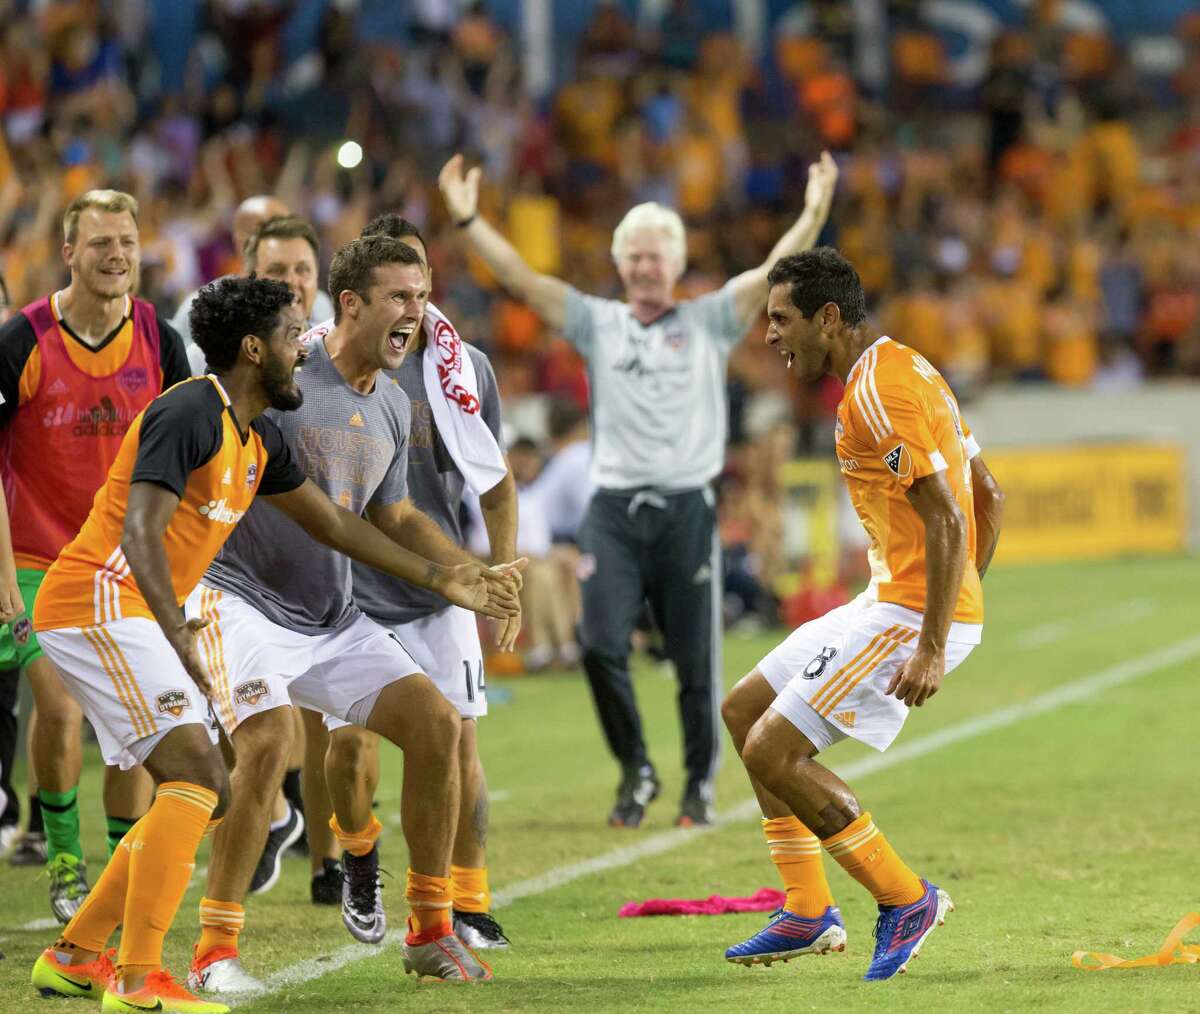 Houston Dynamo midfielder Cristian Maidana (8) celebrates with teammates after scoring in the free kick during the second half of action between the between the Houston Dynamo and the Philadelphia Union during an MLS soccer game at BBVA Compass, Saturday, July 02, 2016, in Houston. Houston Dynamo defeated Philadelphia Union 1-0. (Juan DeLeon/for the Houston Chronicle )